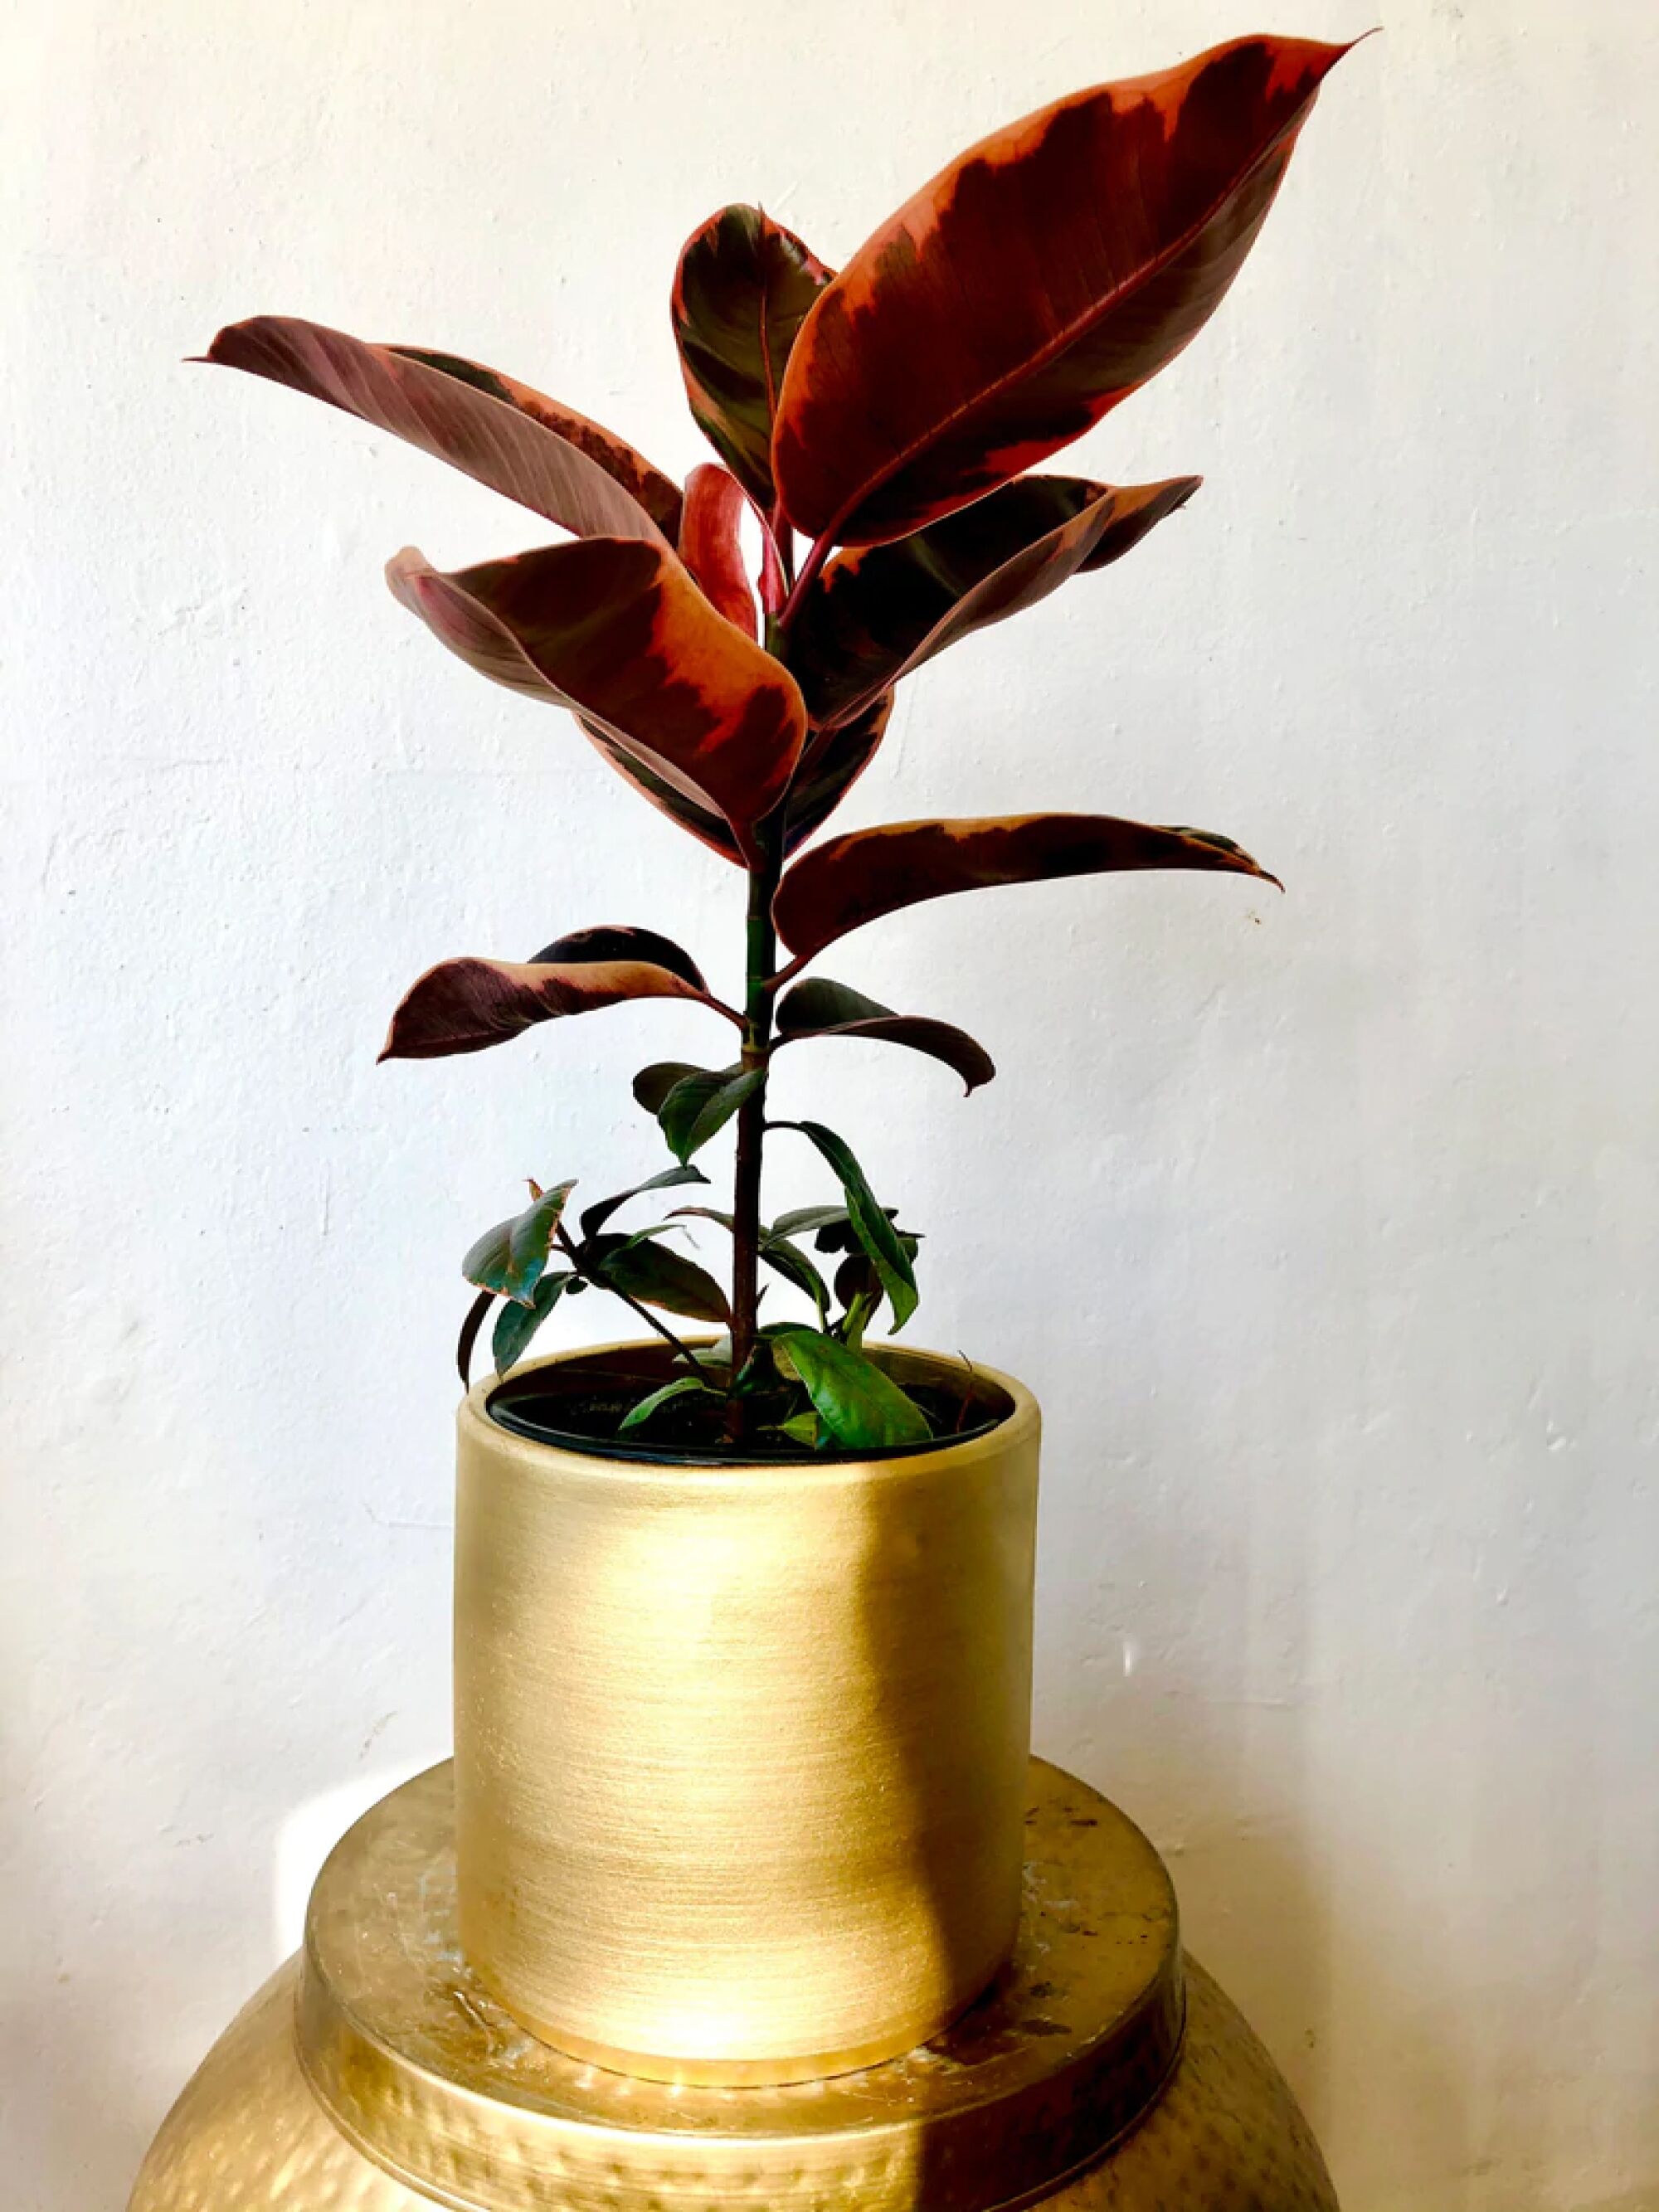 A red rubber tree plant in a gold planter sitting in front of a white wall.